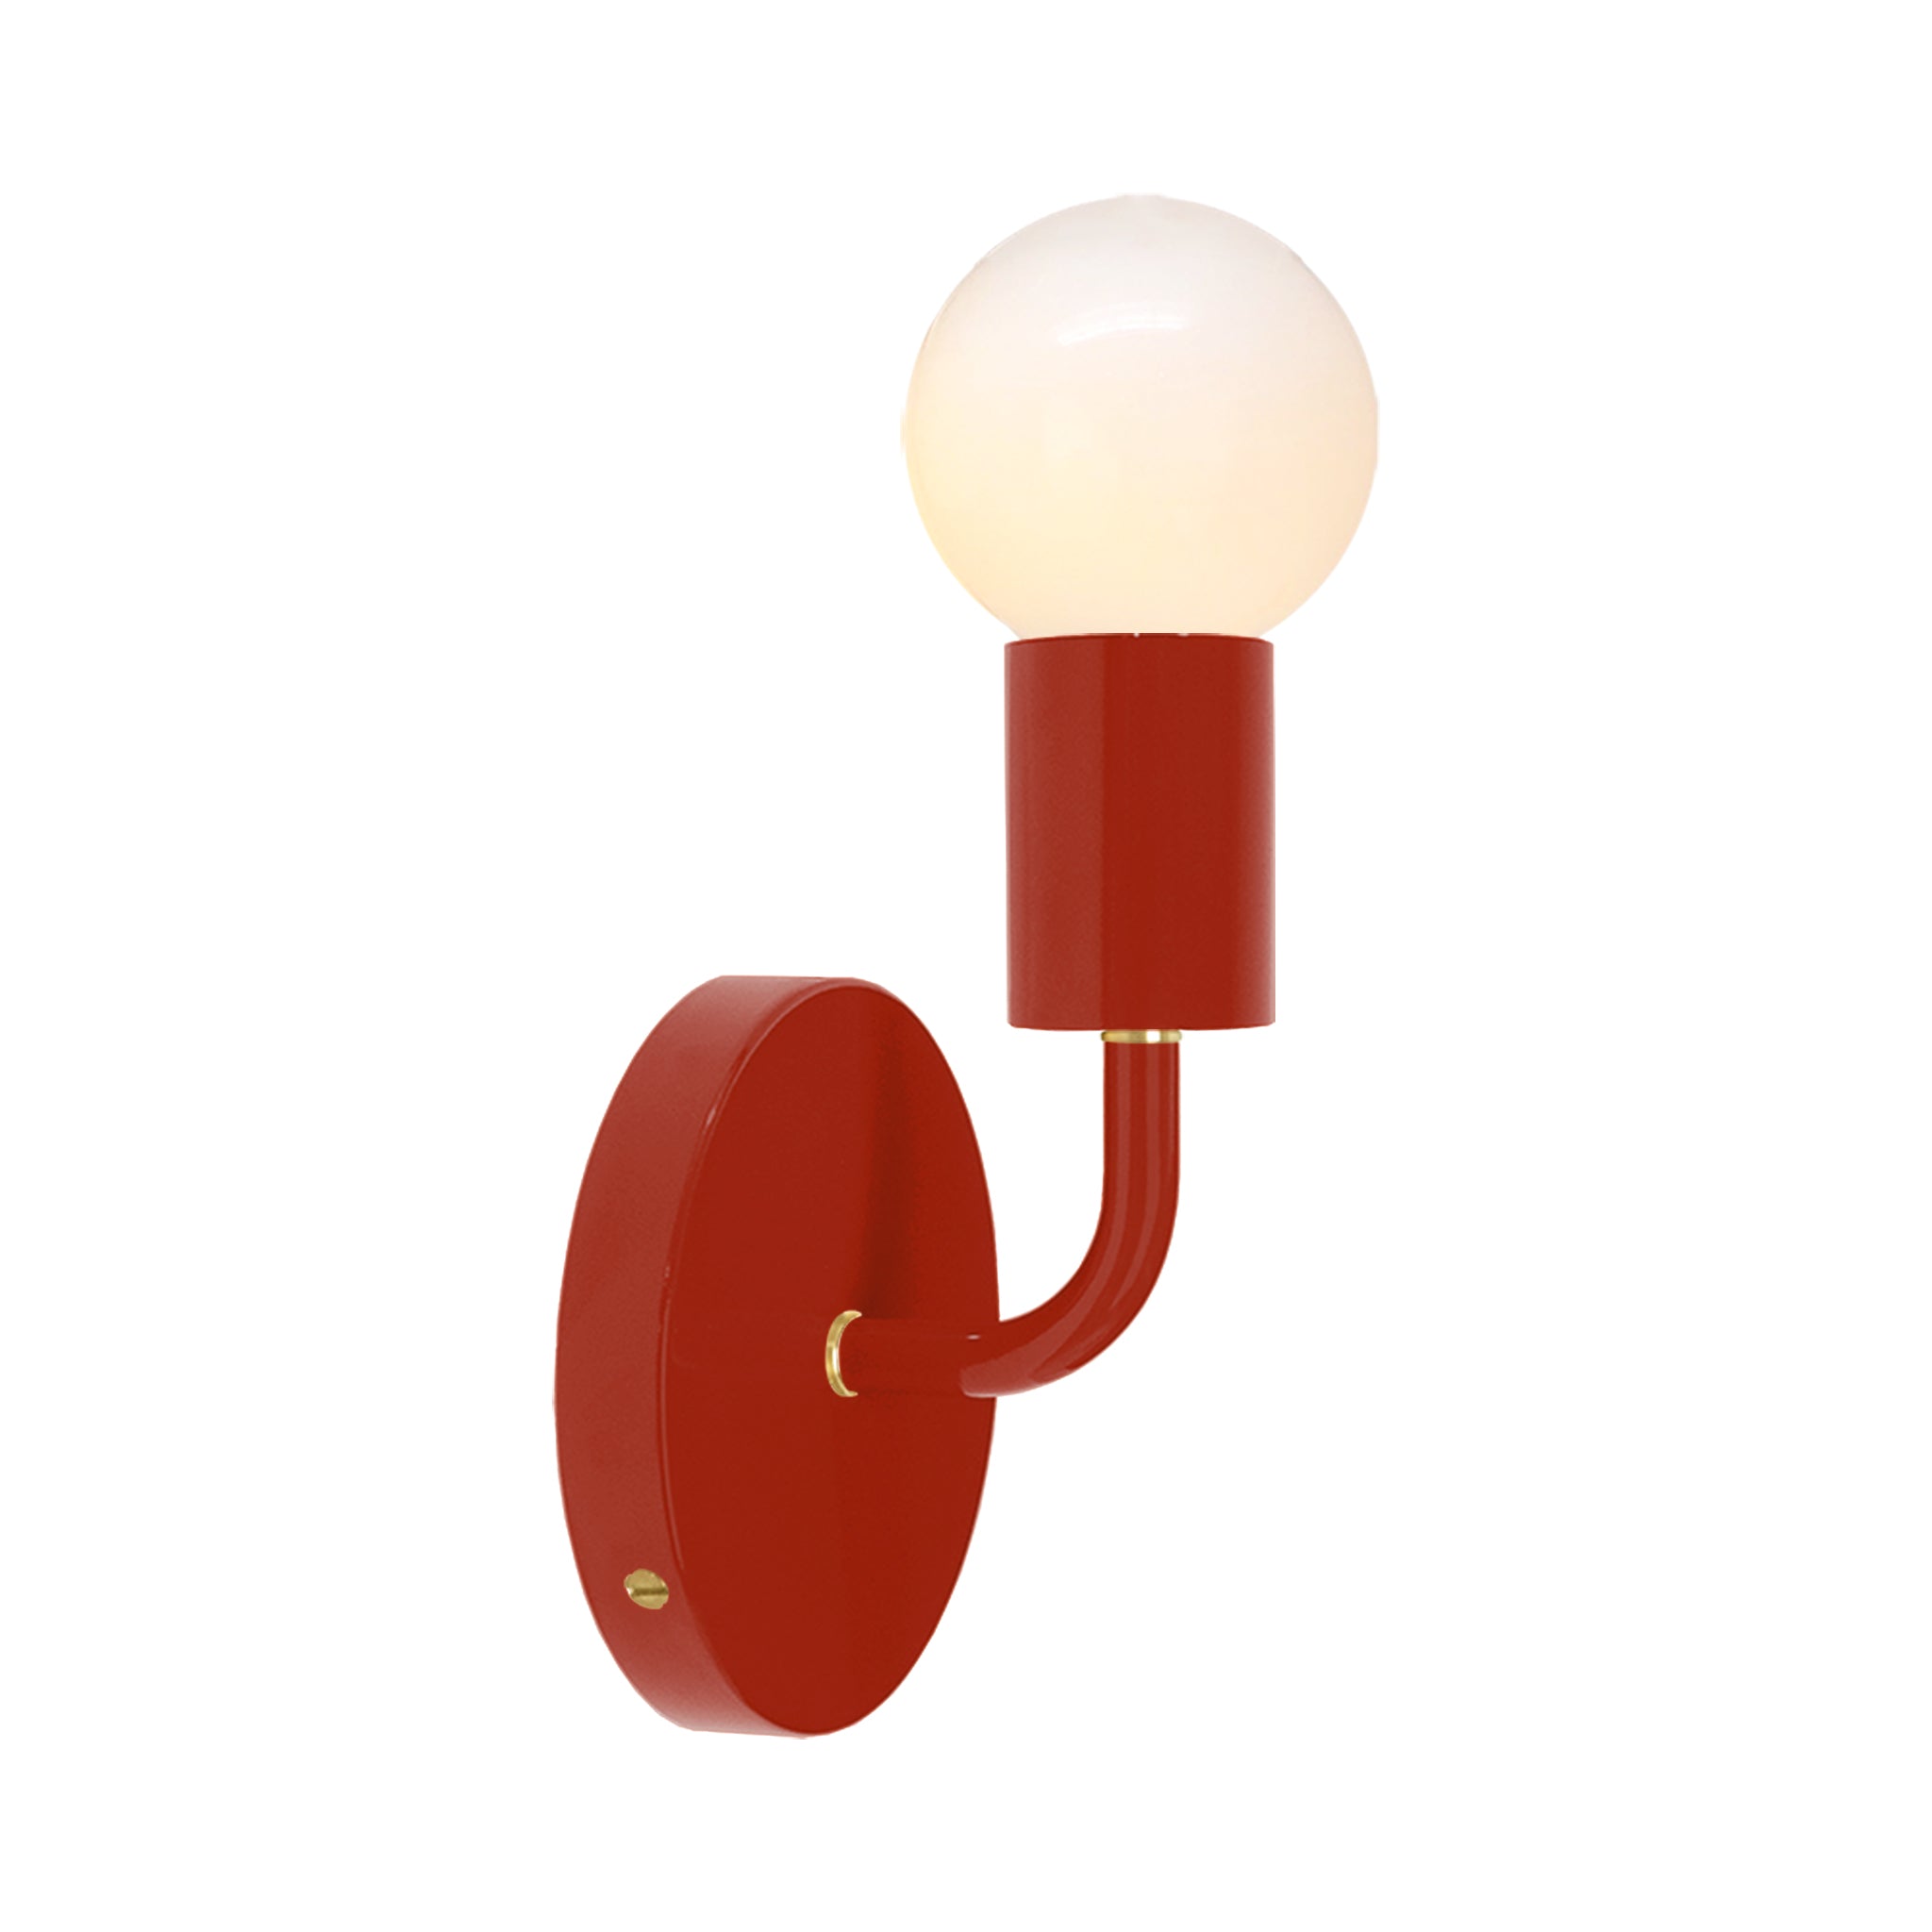 Brass and riding hood red color Snug sconce Dutton Brown lighting